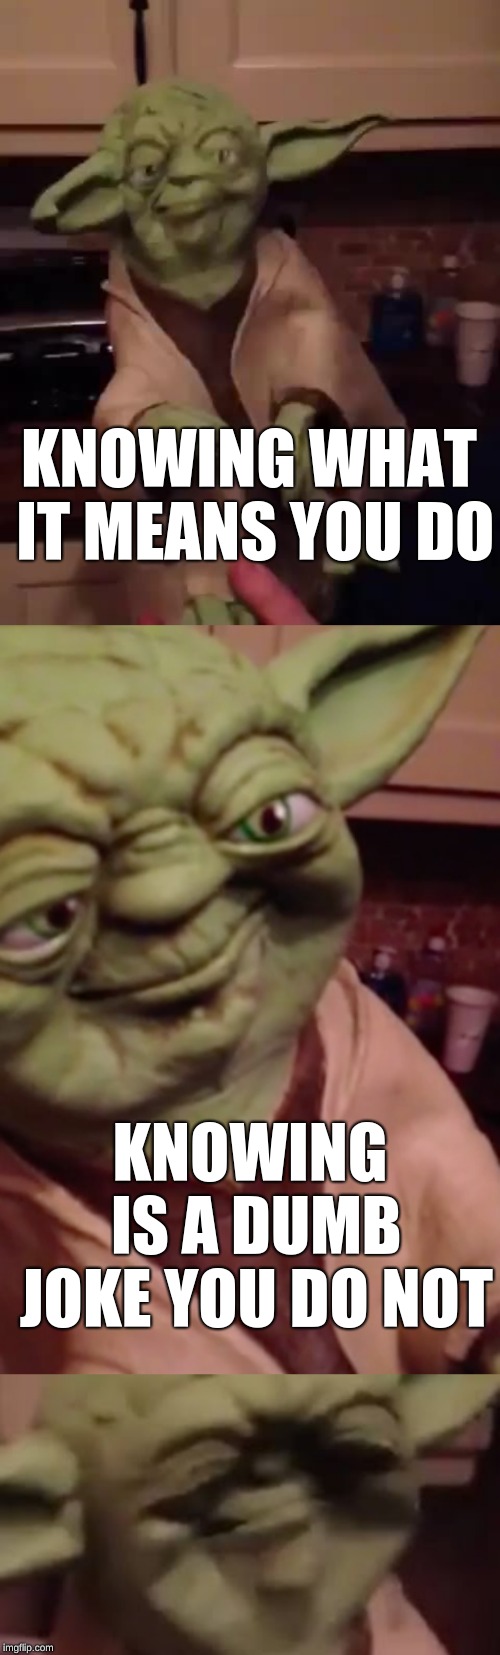 Yoda Bad Joke | KNOWING WHAT IT MEANS YOU DO KNOWING IS A DUMB JOKE YOU DO NOT | image tagged in yoda bad joke | made w/ Imgflip meme maker